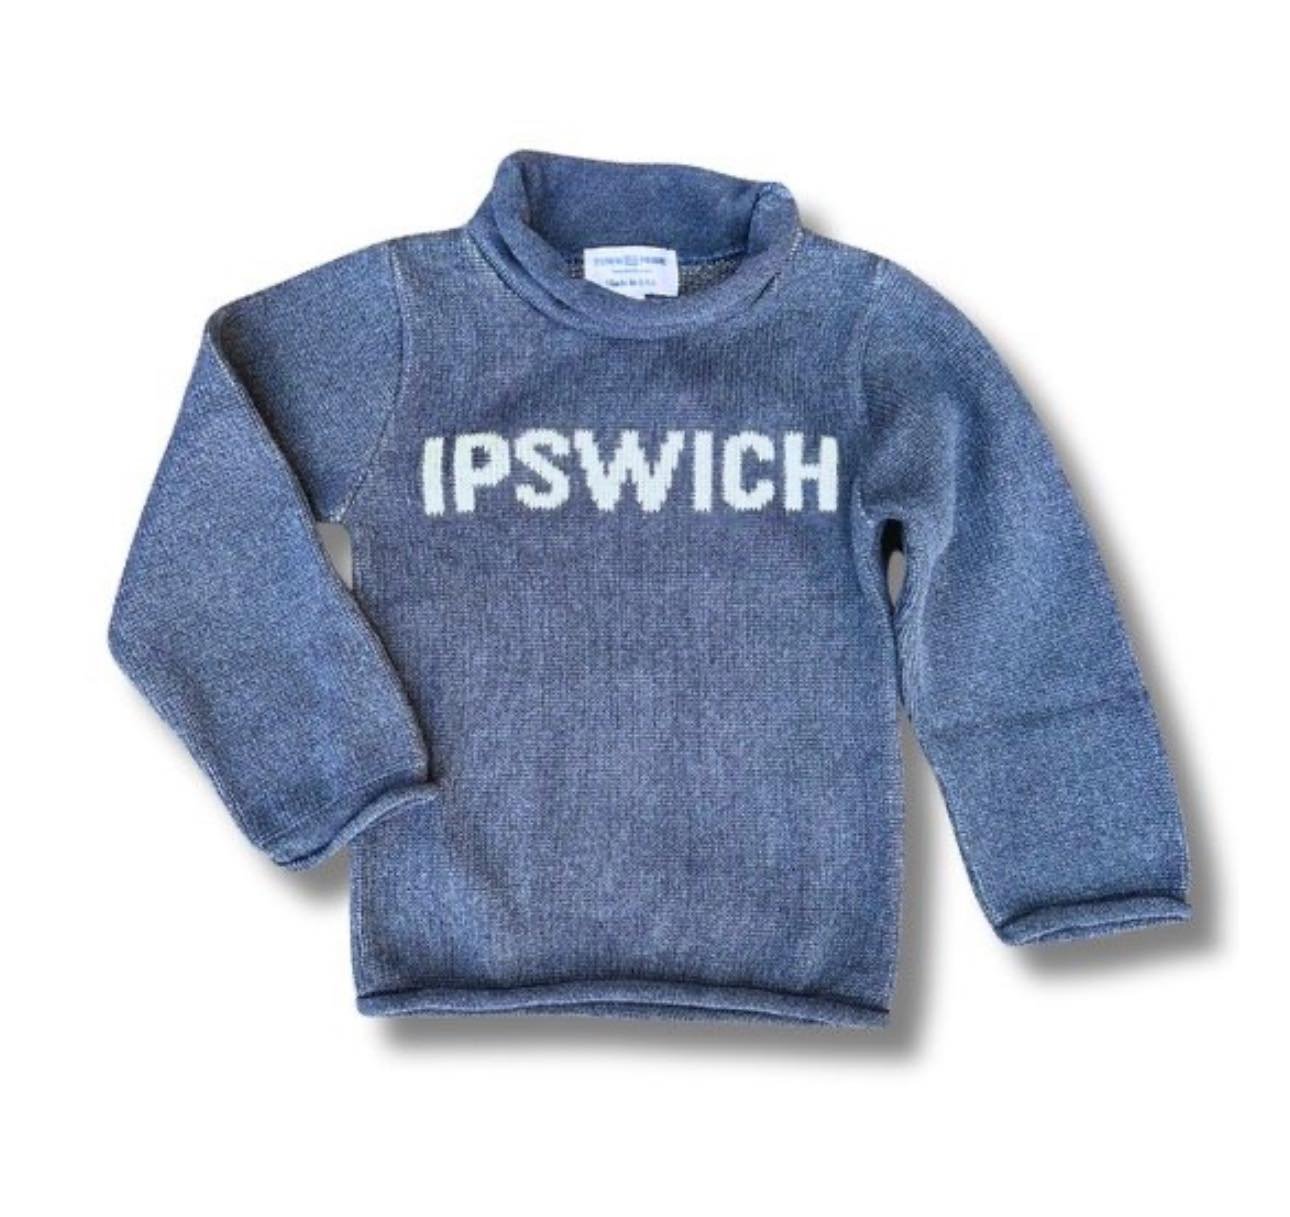 IPSWICH &quot;Home Town&quot; Little Kids' Roll Neck Sweater Sweater!
This is our most cozy and &ldquo;wearable&rdquo; and children&rsquo;s sweater we offer!  The color is denim with  creamy off-white with colored lettering.  It could be worn oversiz